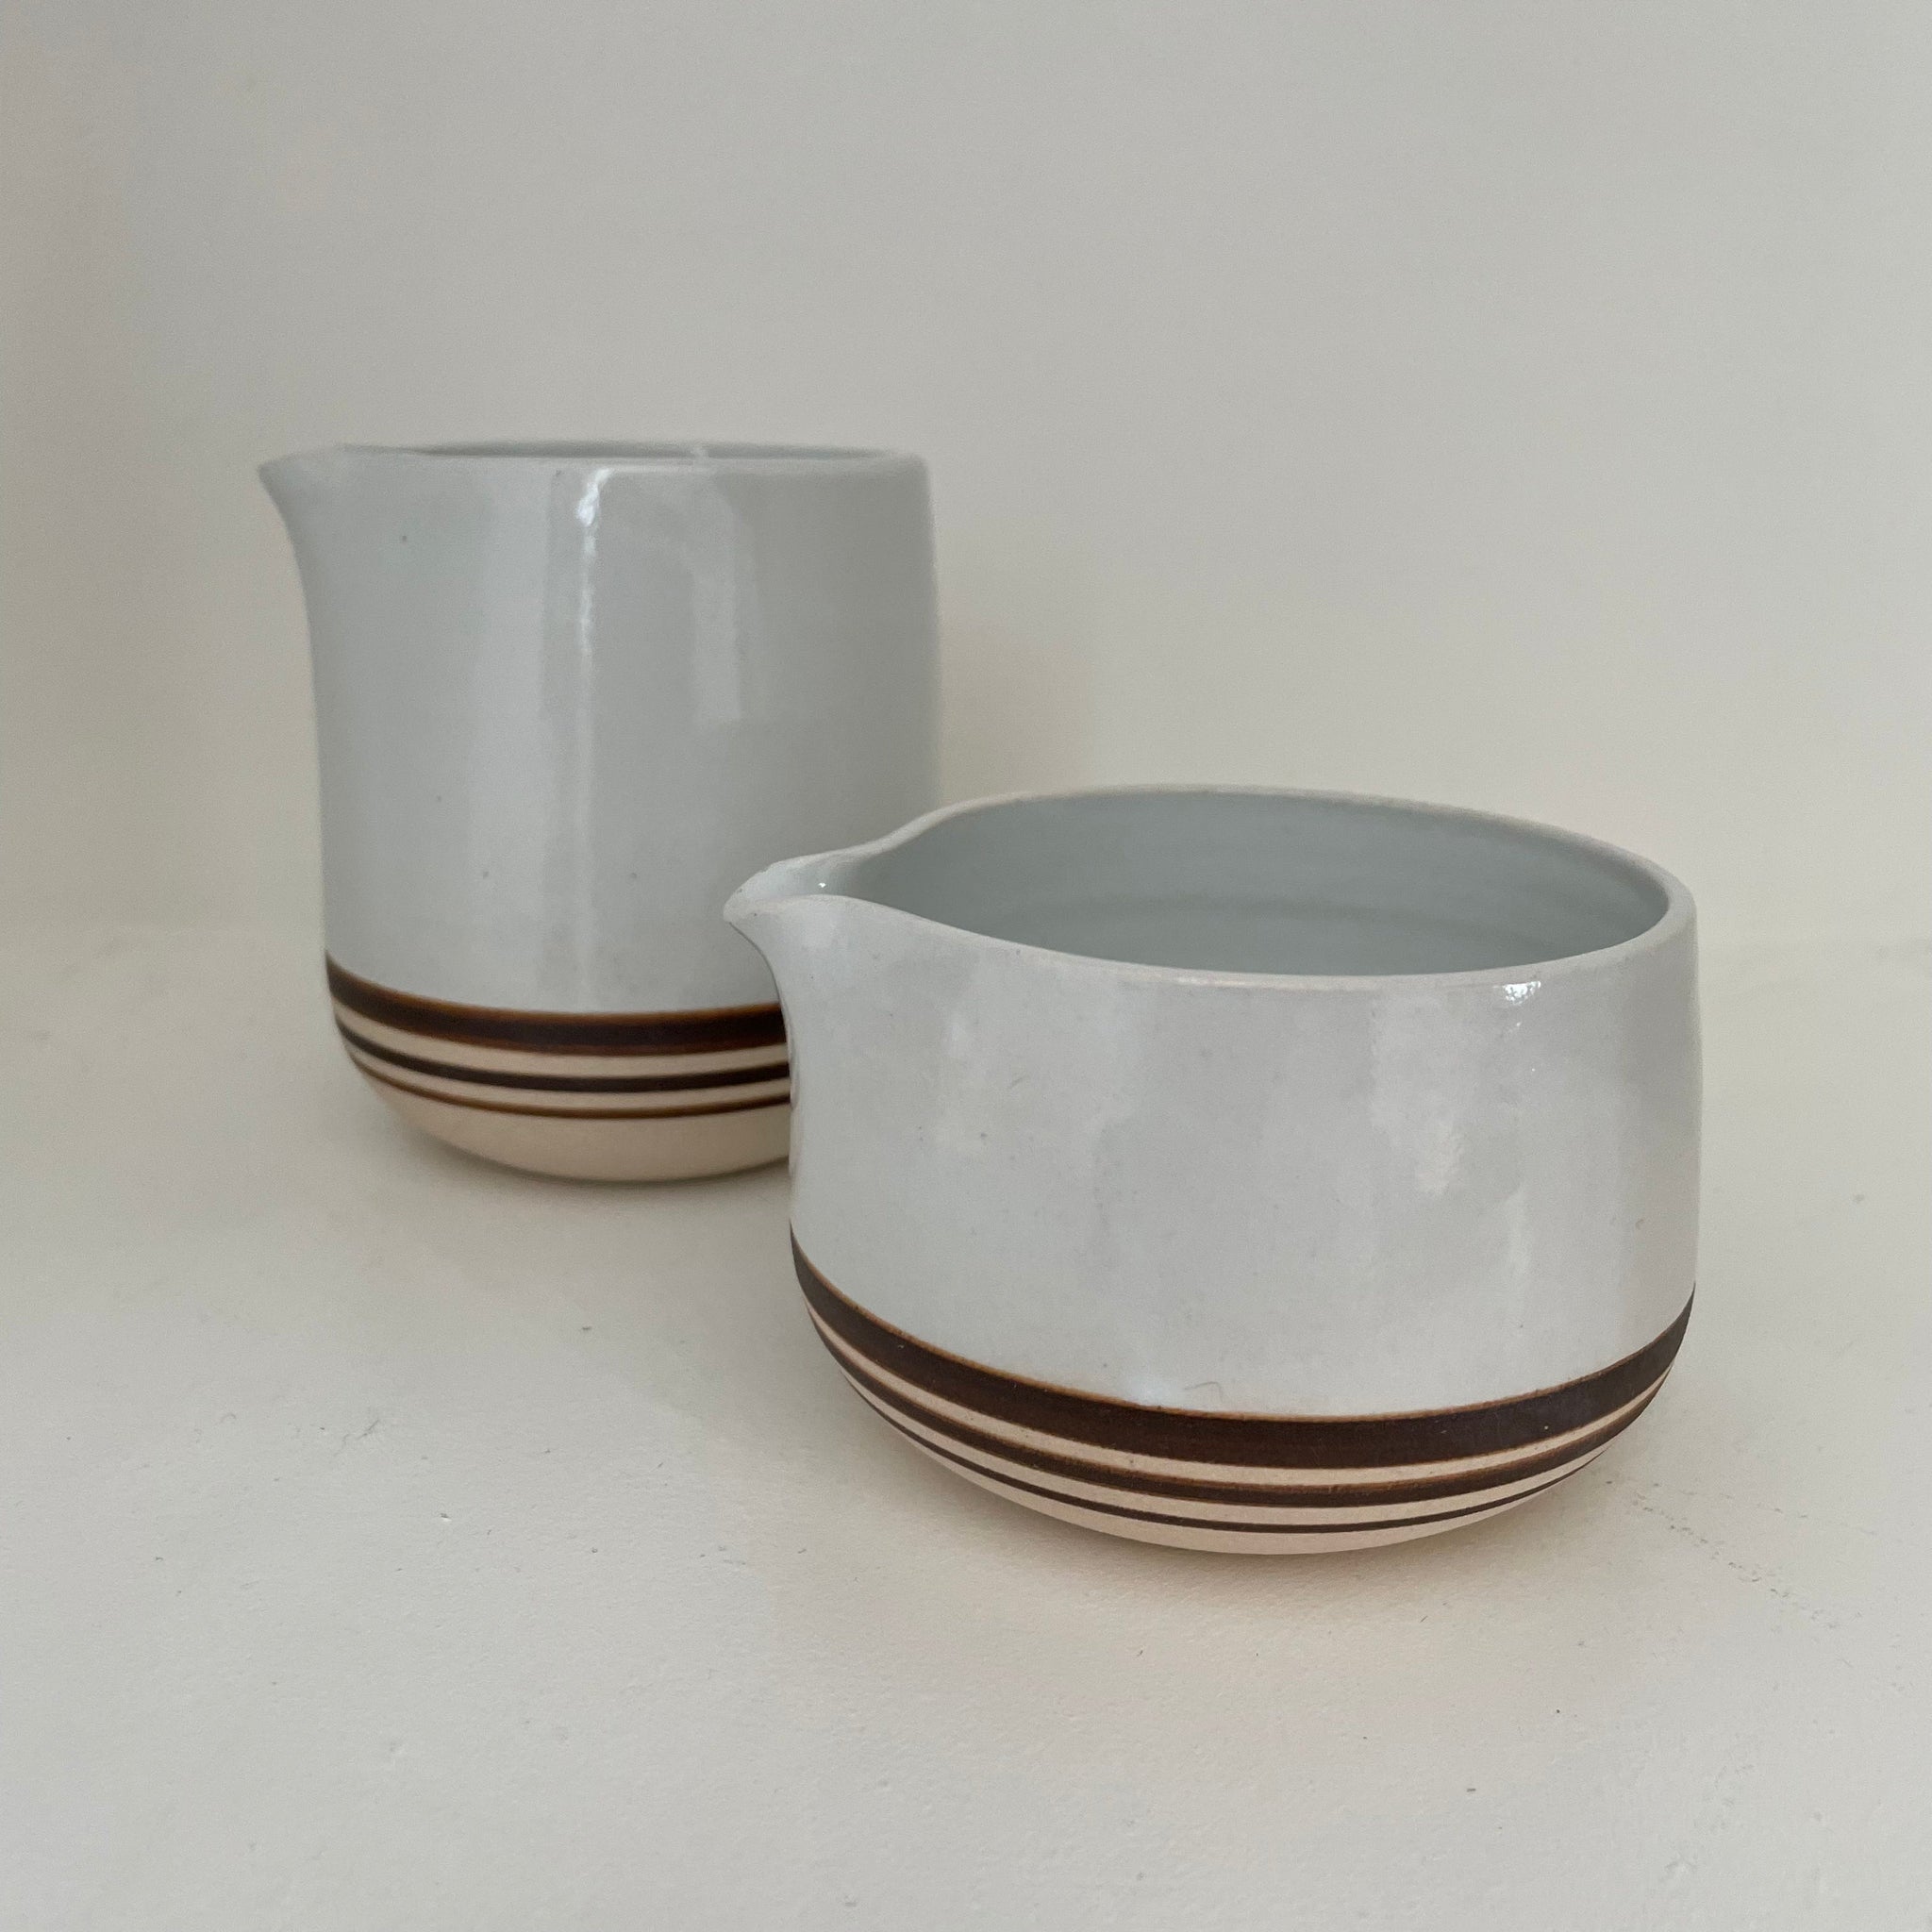 Charlotte Grinling Ceramics pale Blue with Chocolate Stripe collection